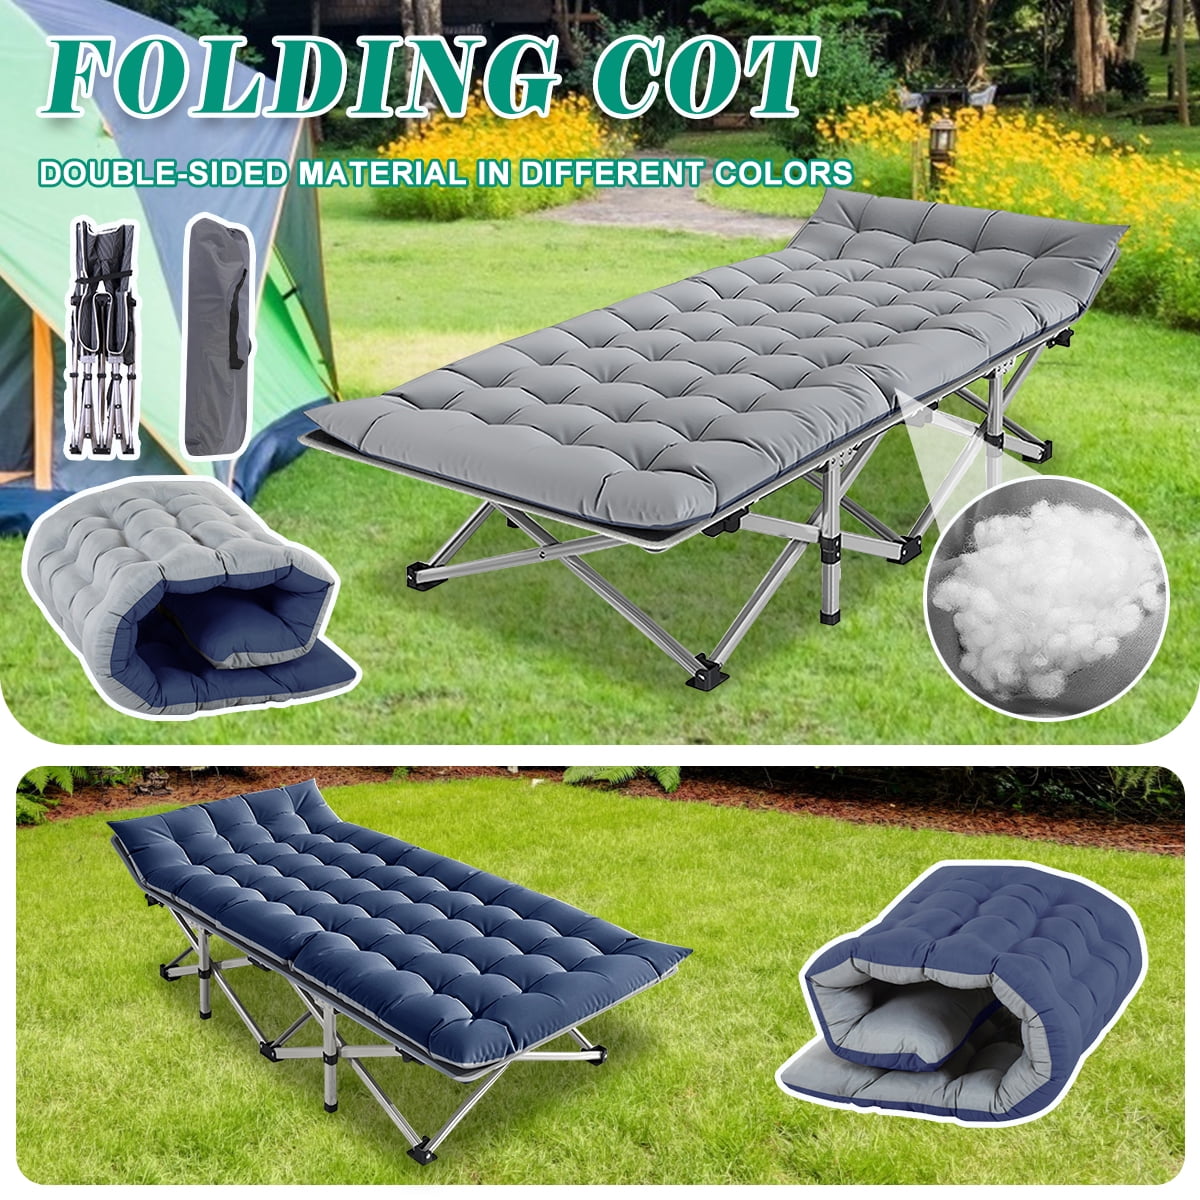 Travel cots and Folding Cots Keeps Your Sleeping Pad Secure! Military cots Fitted Camping Cot Sheet for Adult Sleeping Cots Great for Hunting Camping Bedding That fits Most Army cots 